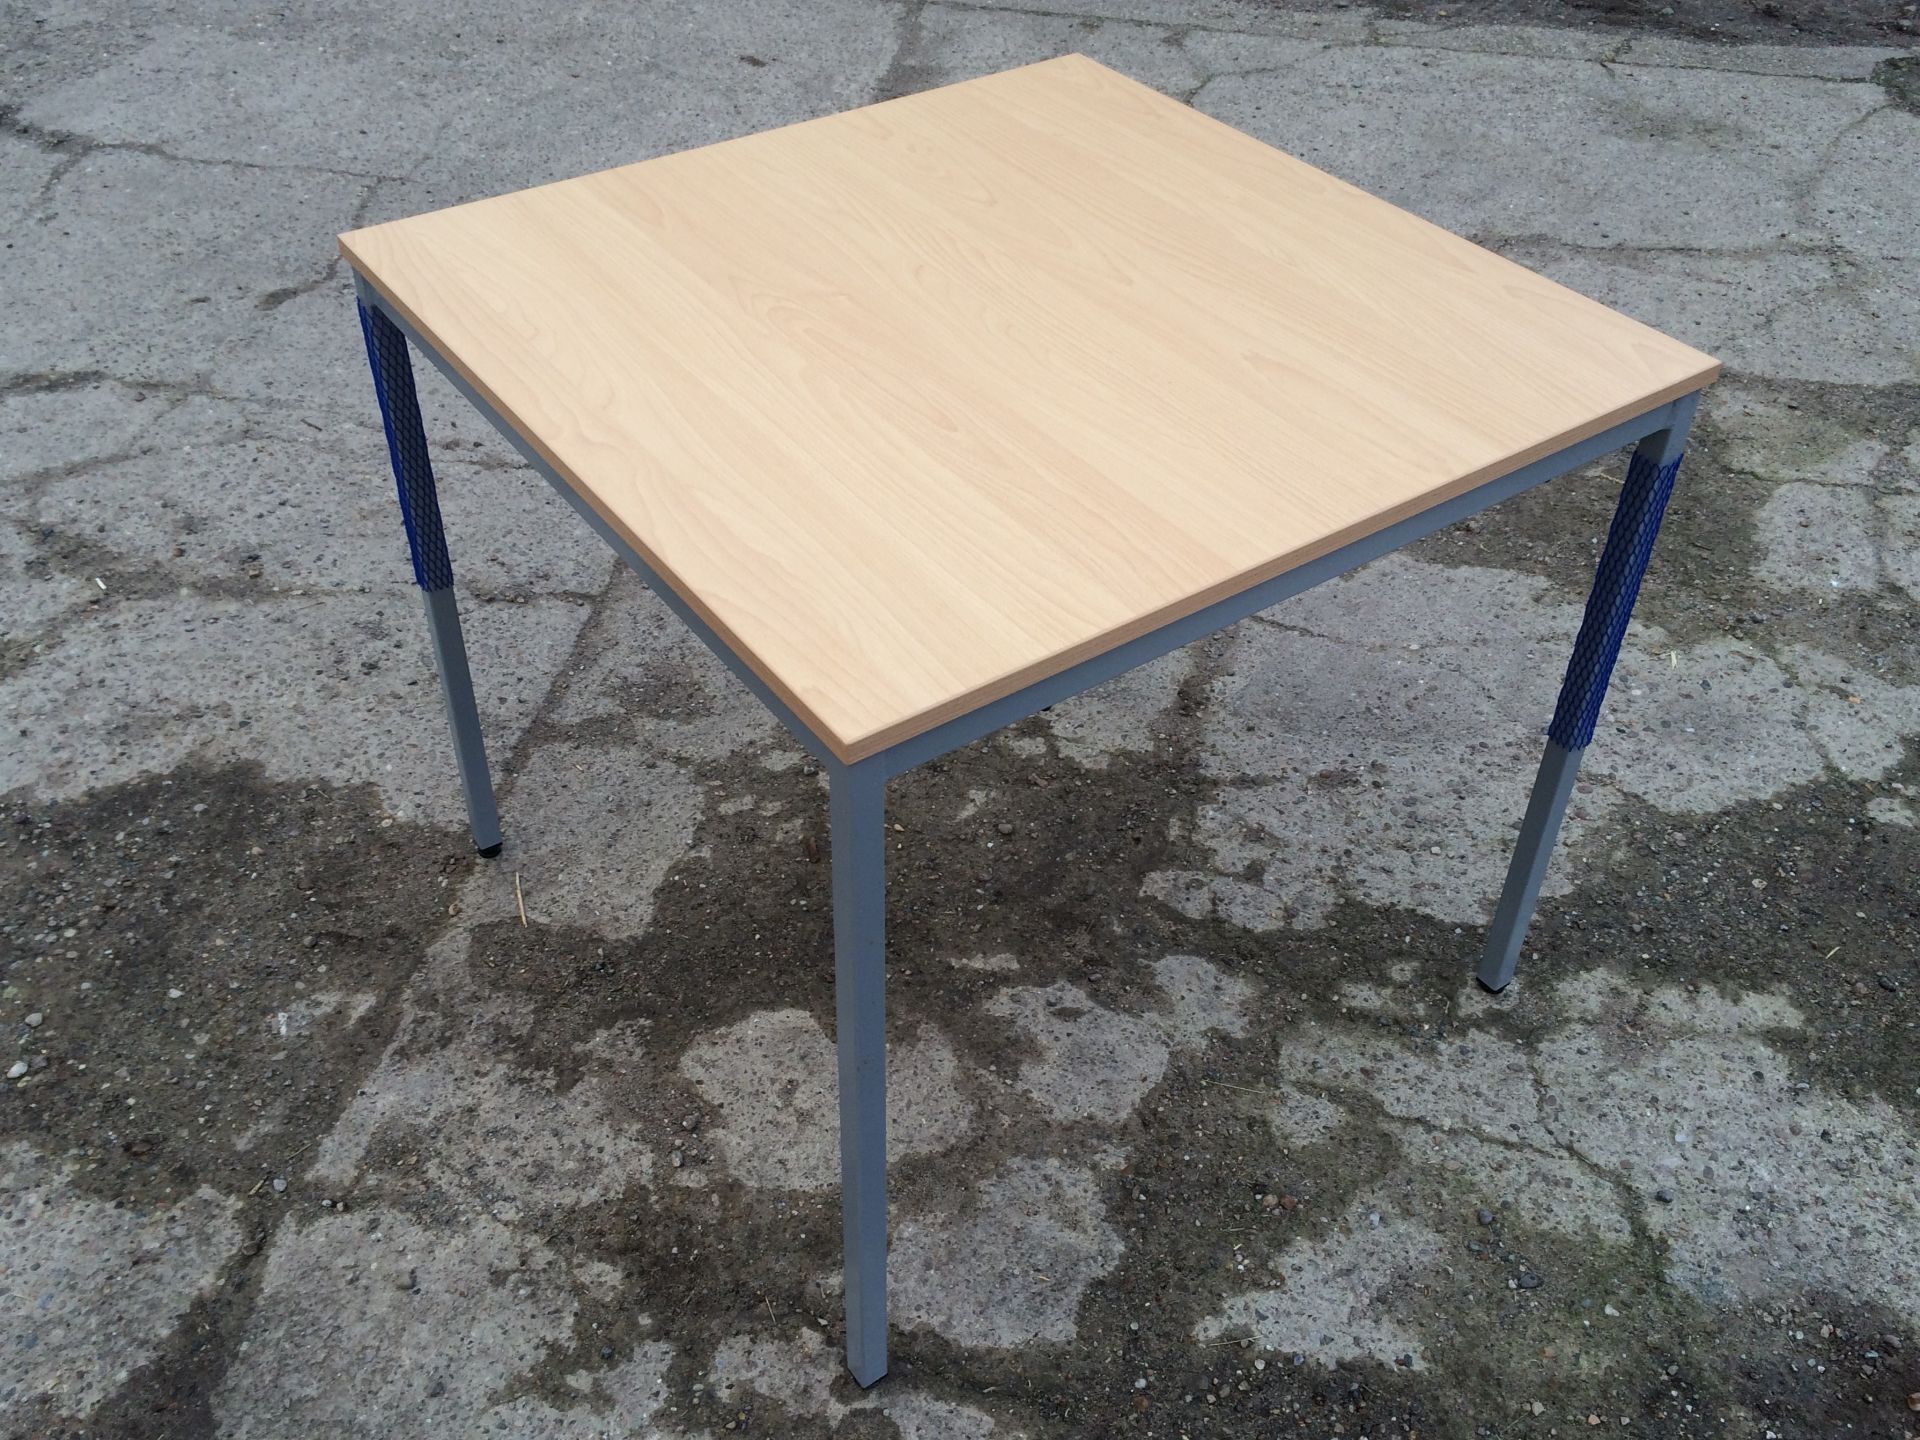 Square Wooden Effect Table With Metal Legs ( Height: 73cm / Width: 80cm )